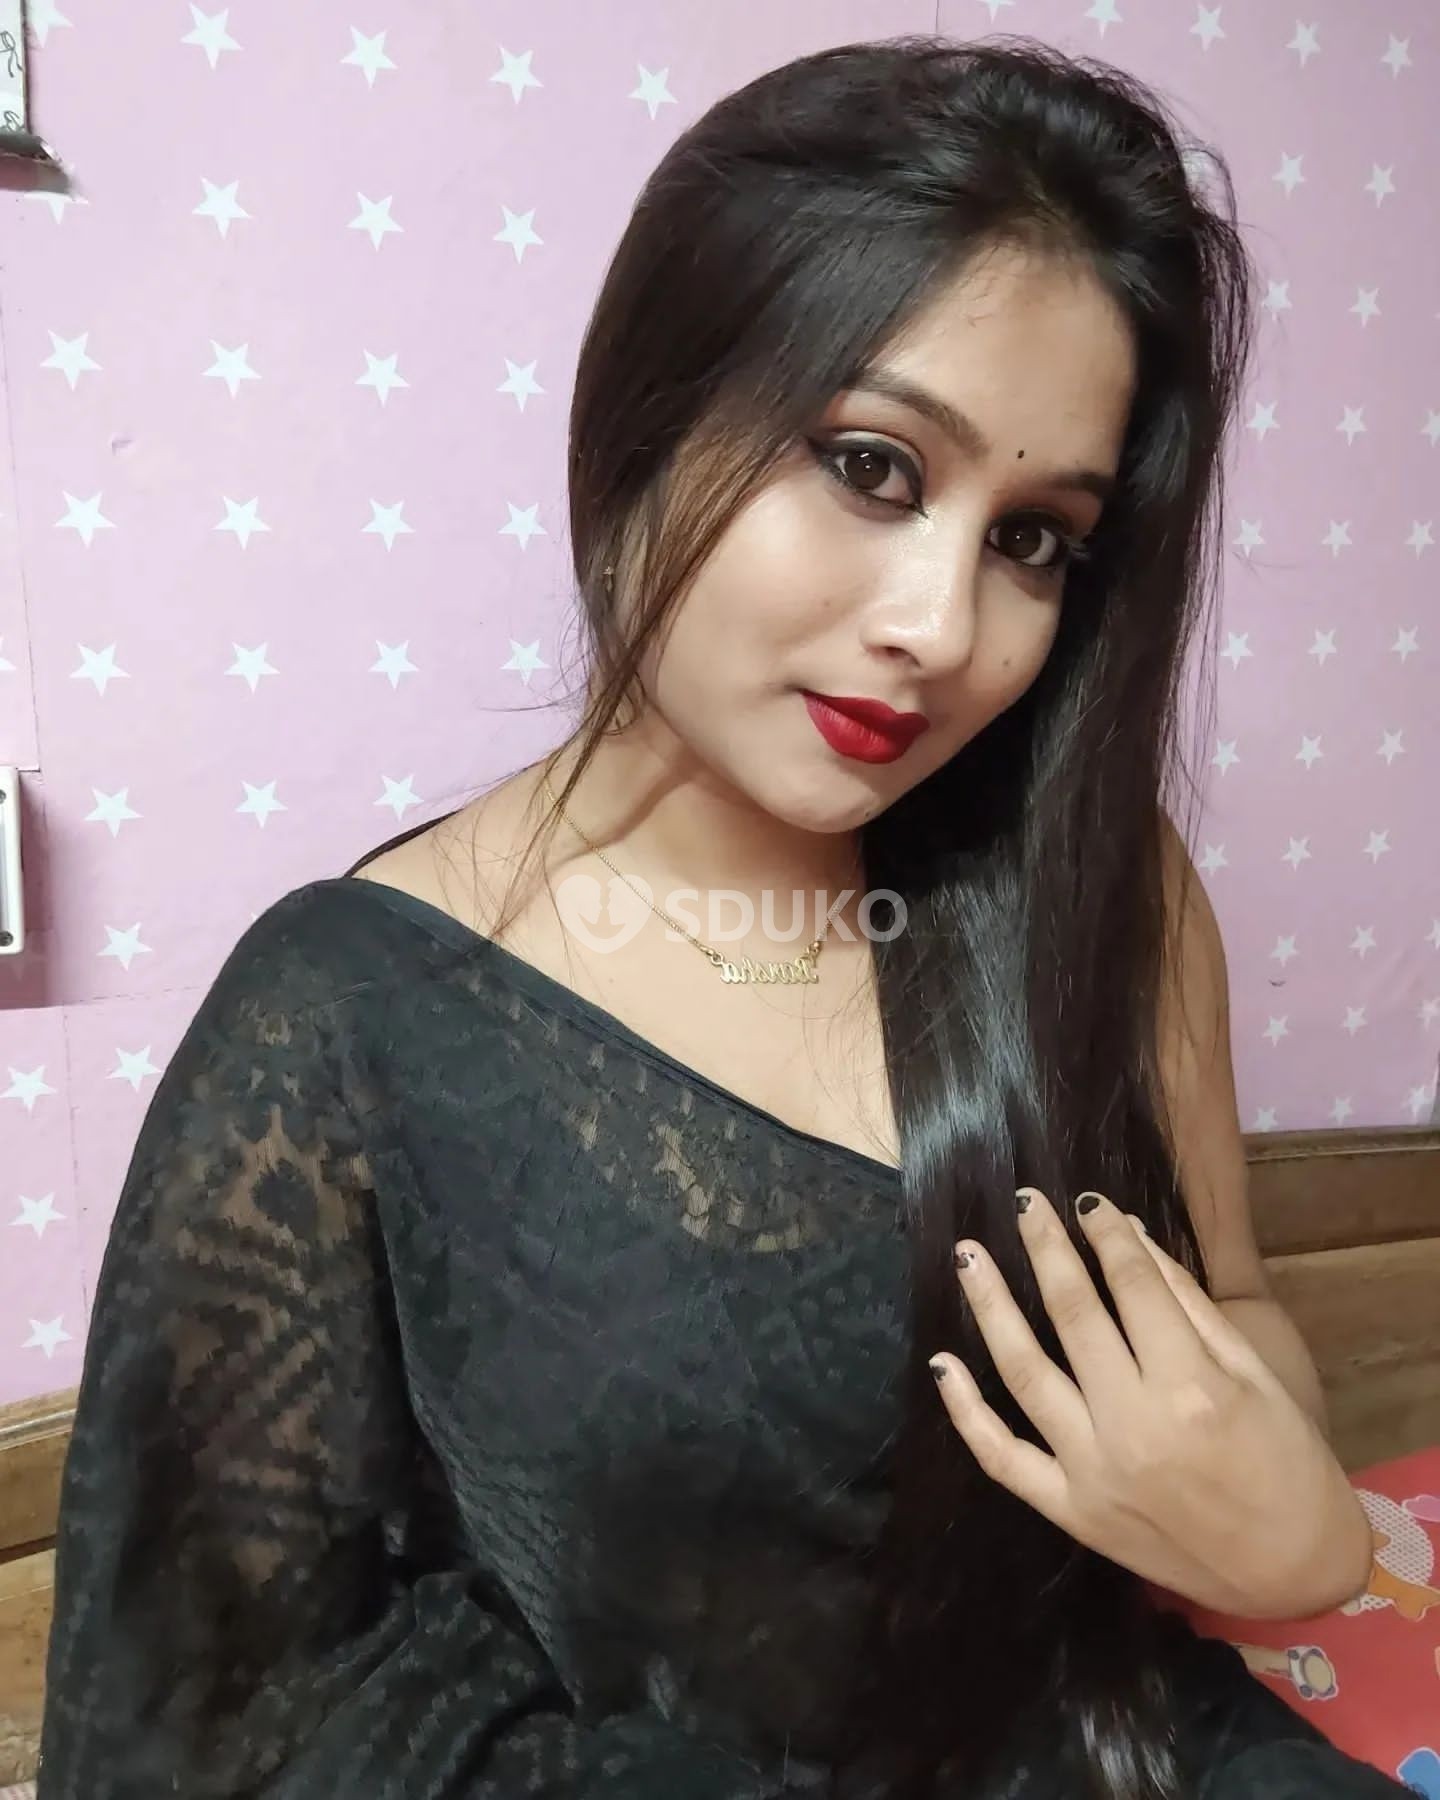 KOLKATA TODAY LOW PRICE 100% SAFE AND SECURE GENUINE CALL GIRL AFFORDABLE PRICES